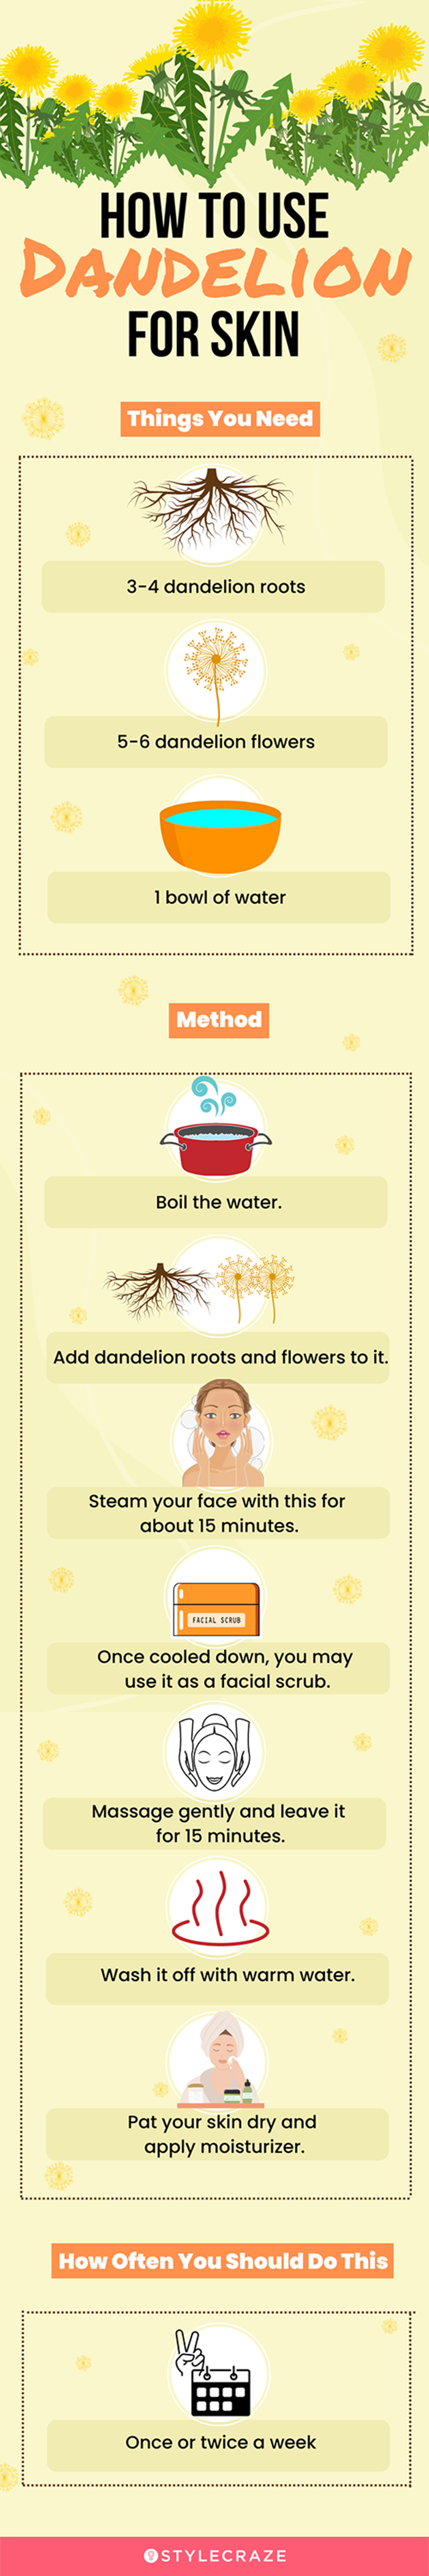 how to use dandelion for skin (infographic)